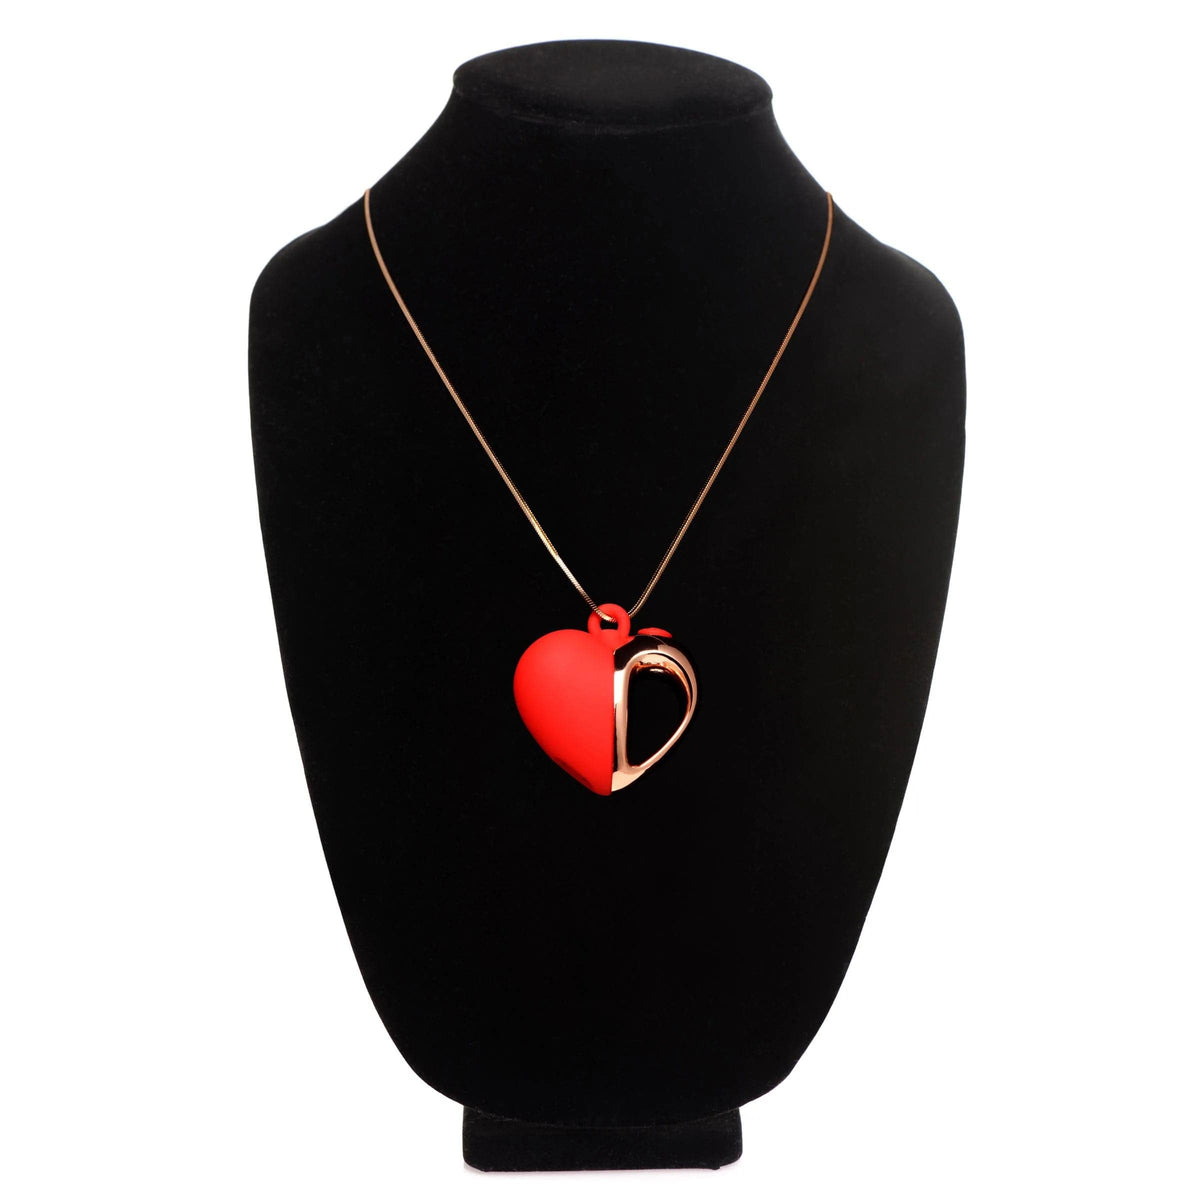 10x vibrating silicone heart necklace rose gold red